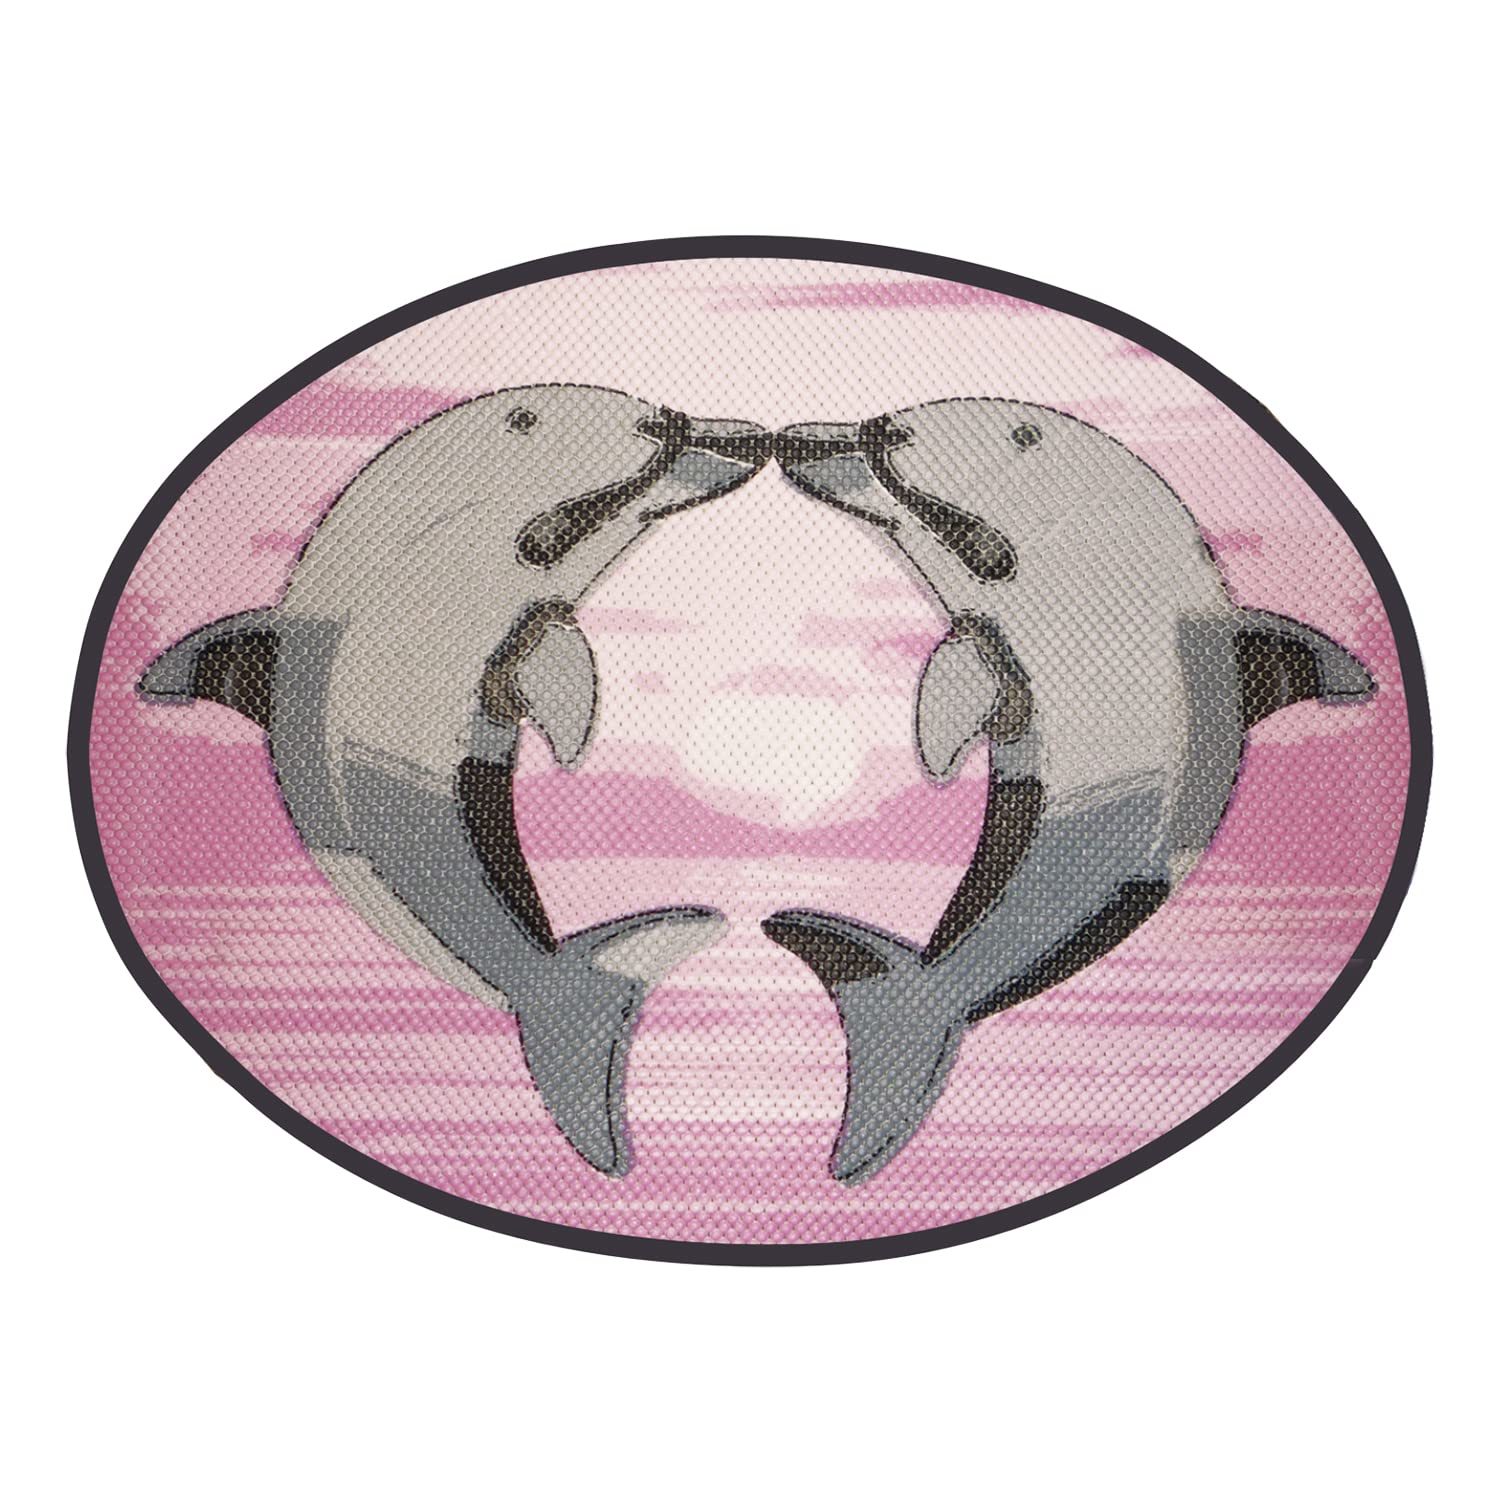 Primary image for Dundee Deco Dolphin Bathroom Mat - 26" x 19" Pink Waterproof Non-Slip Quick Dry 